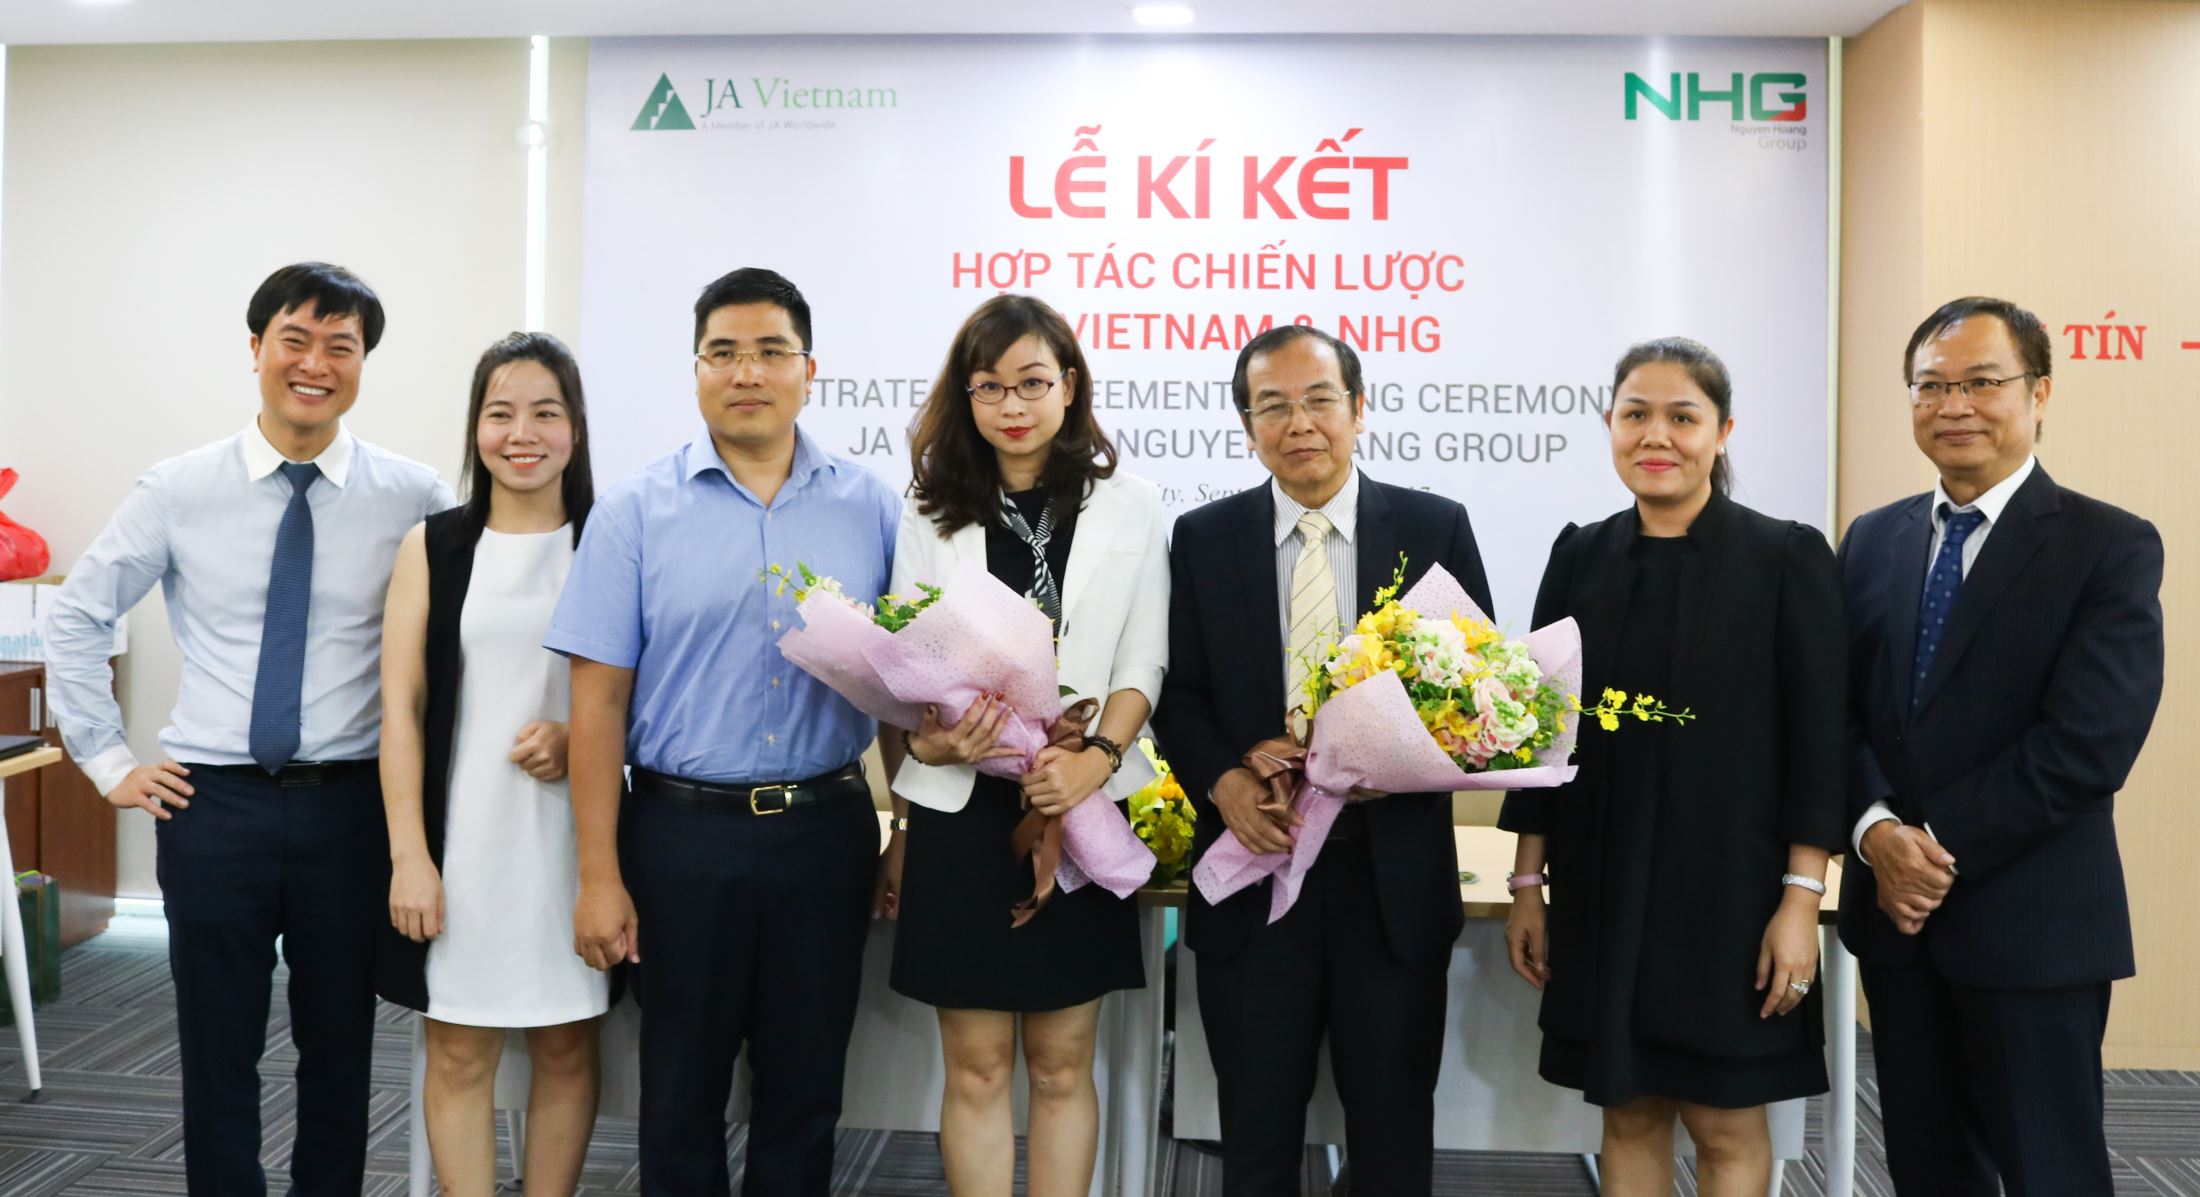 Mrs. Hoang Nguyen Thu Thao - CEO of NHG gaved flowers to leaders of two parties to congratulate on the successful collaboration 